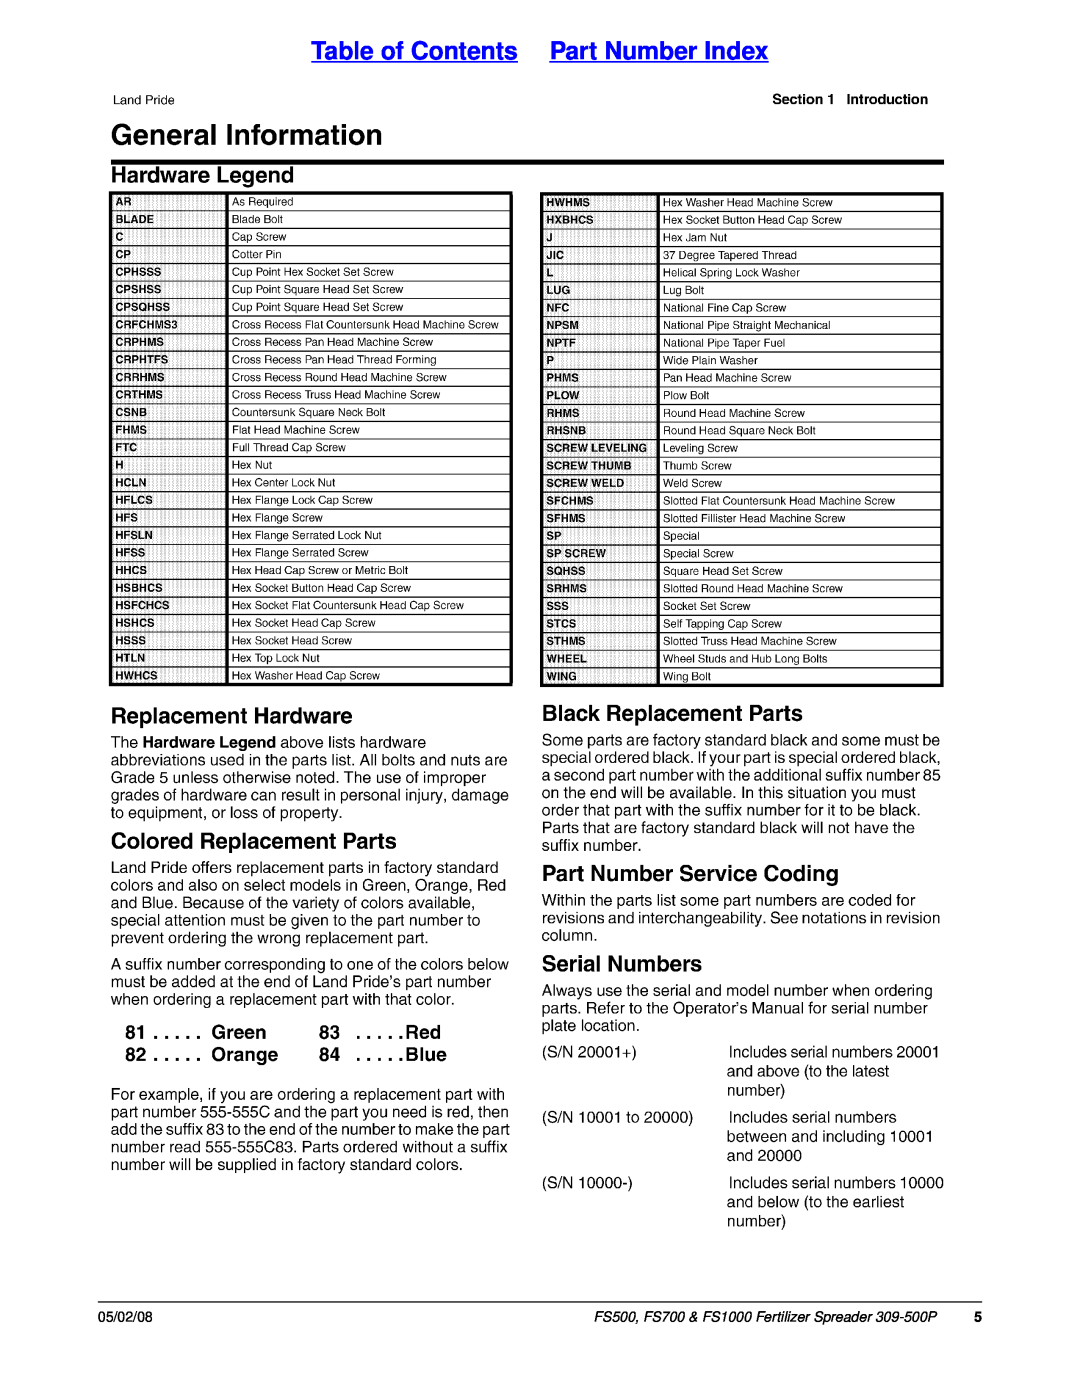 Land Pride FS700, FS500, FS1000 manual Table of Contents Part Number Index, 05/02/08 